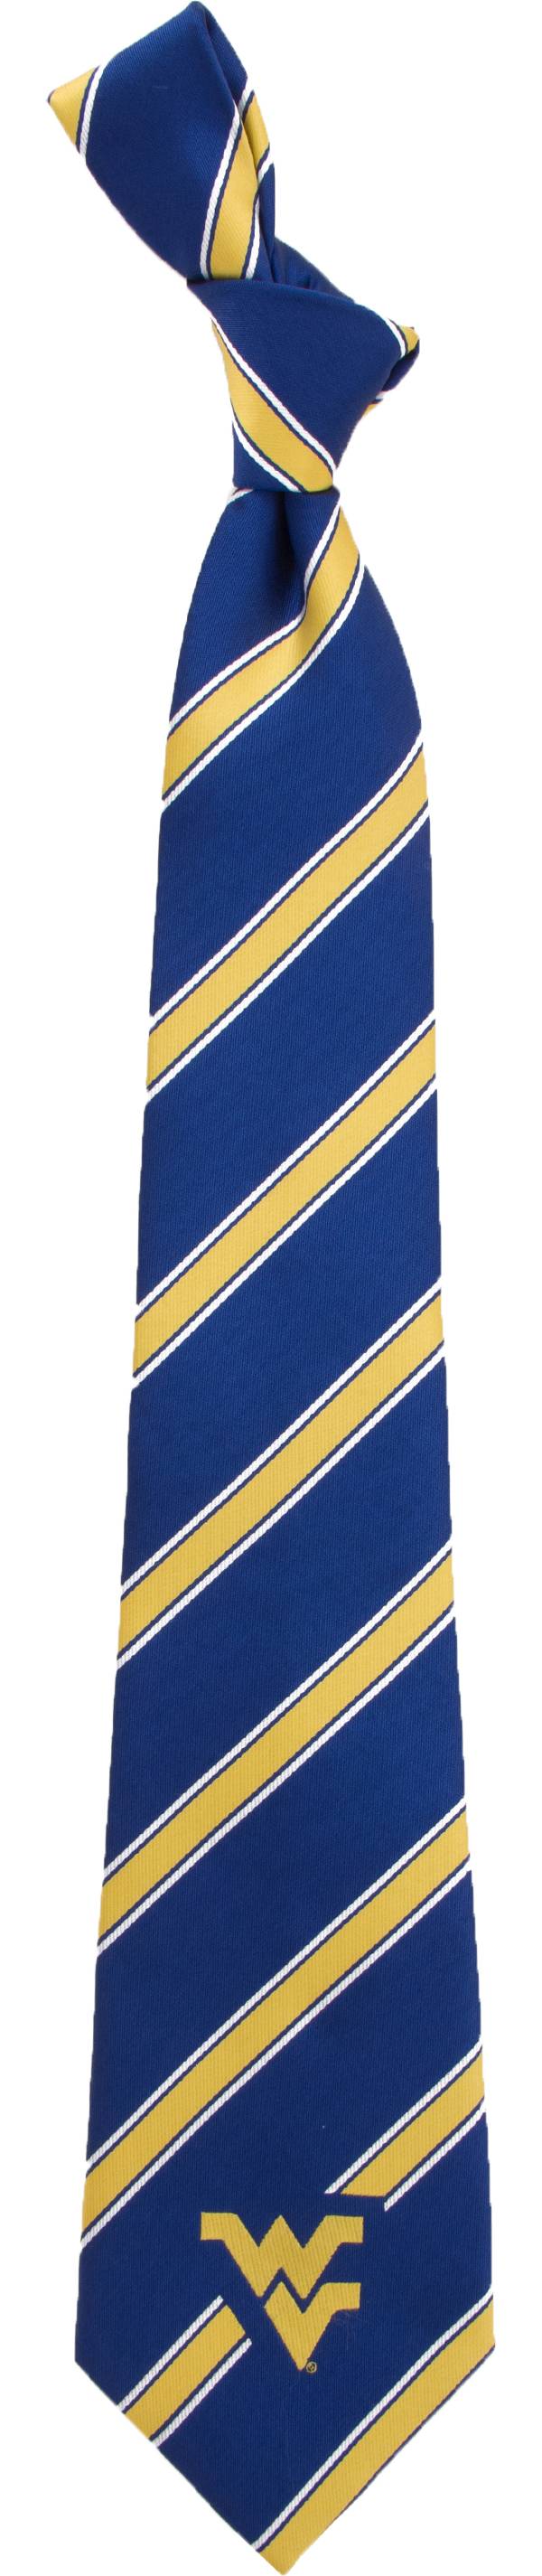 Eagles Wings West Virginia Mountaineers Woven Poly 1 Necktie product image